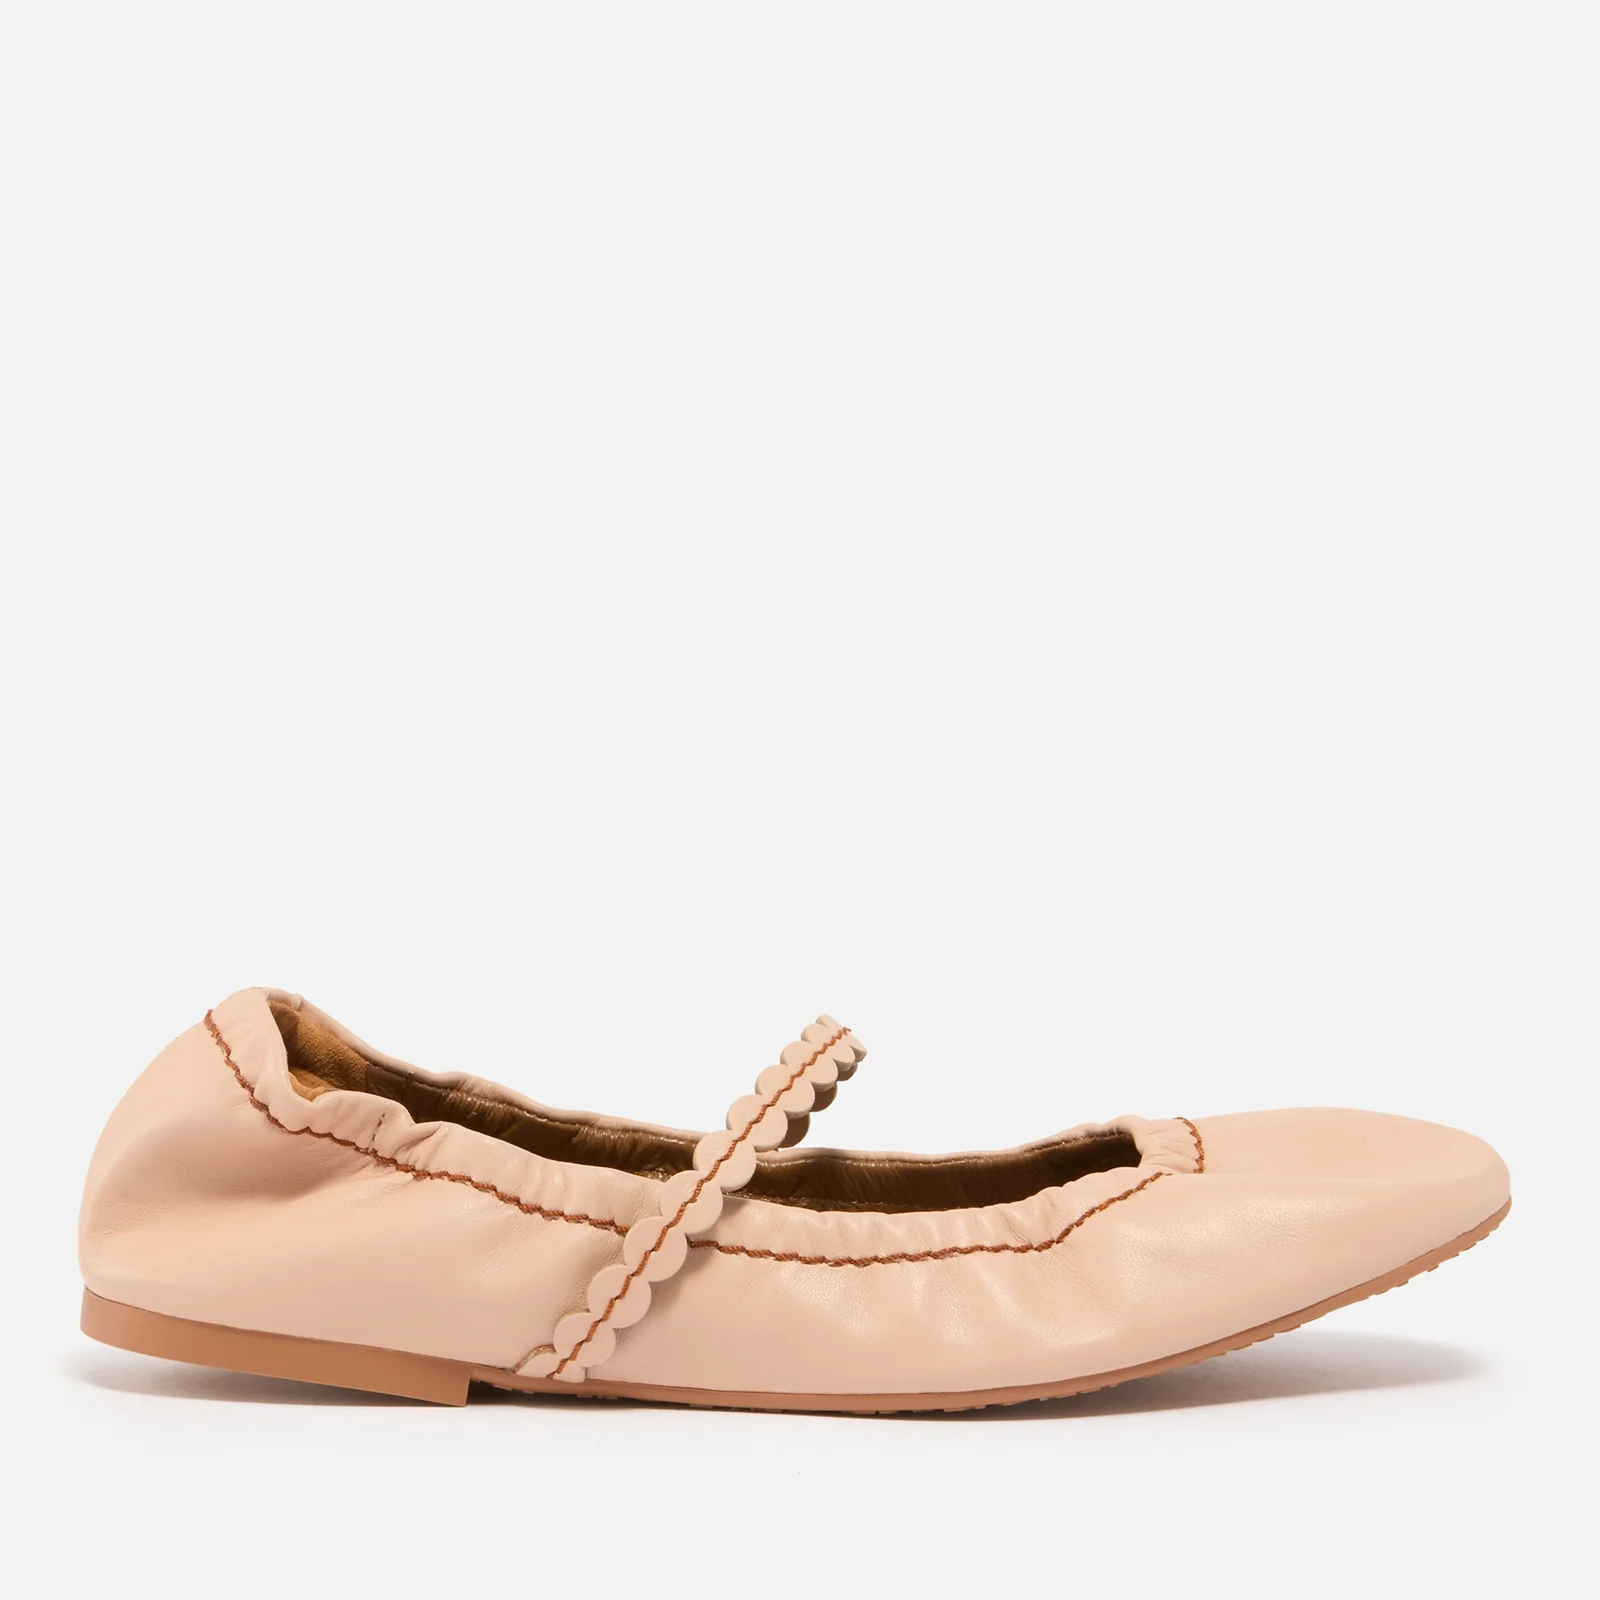 See By Chloé Women's Kaddy Leather Ballet Flats Image 1